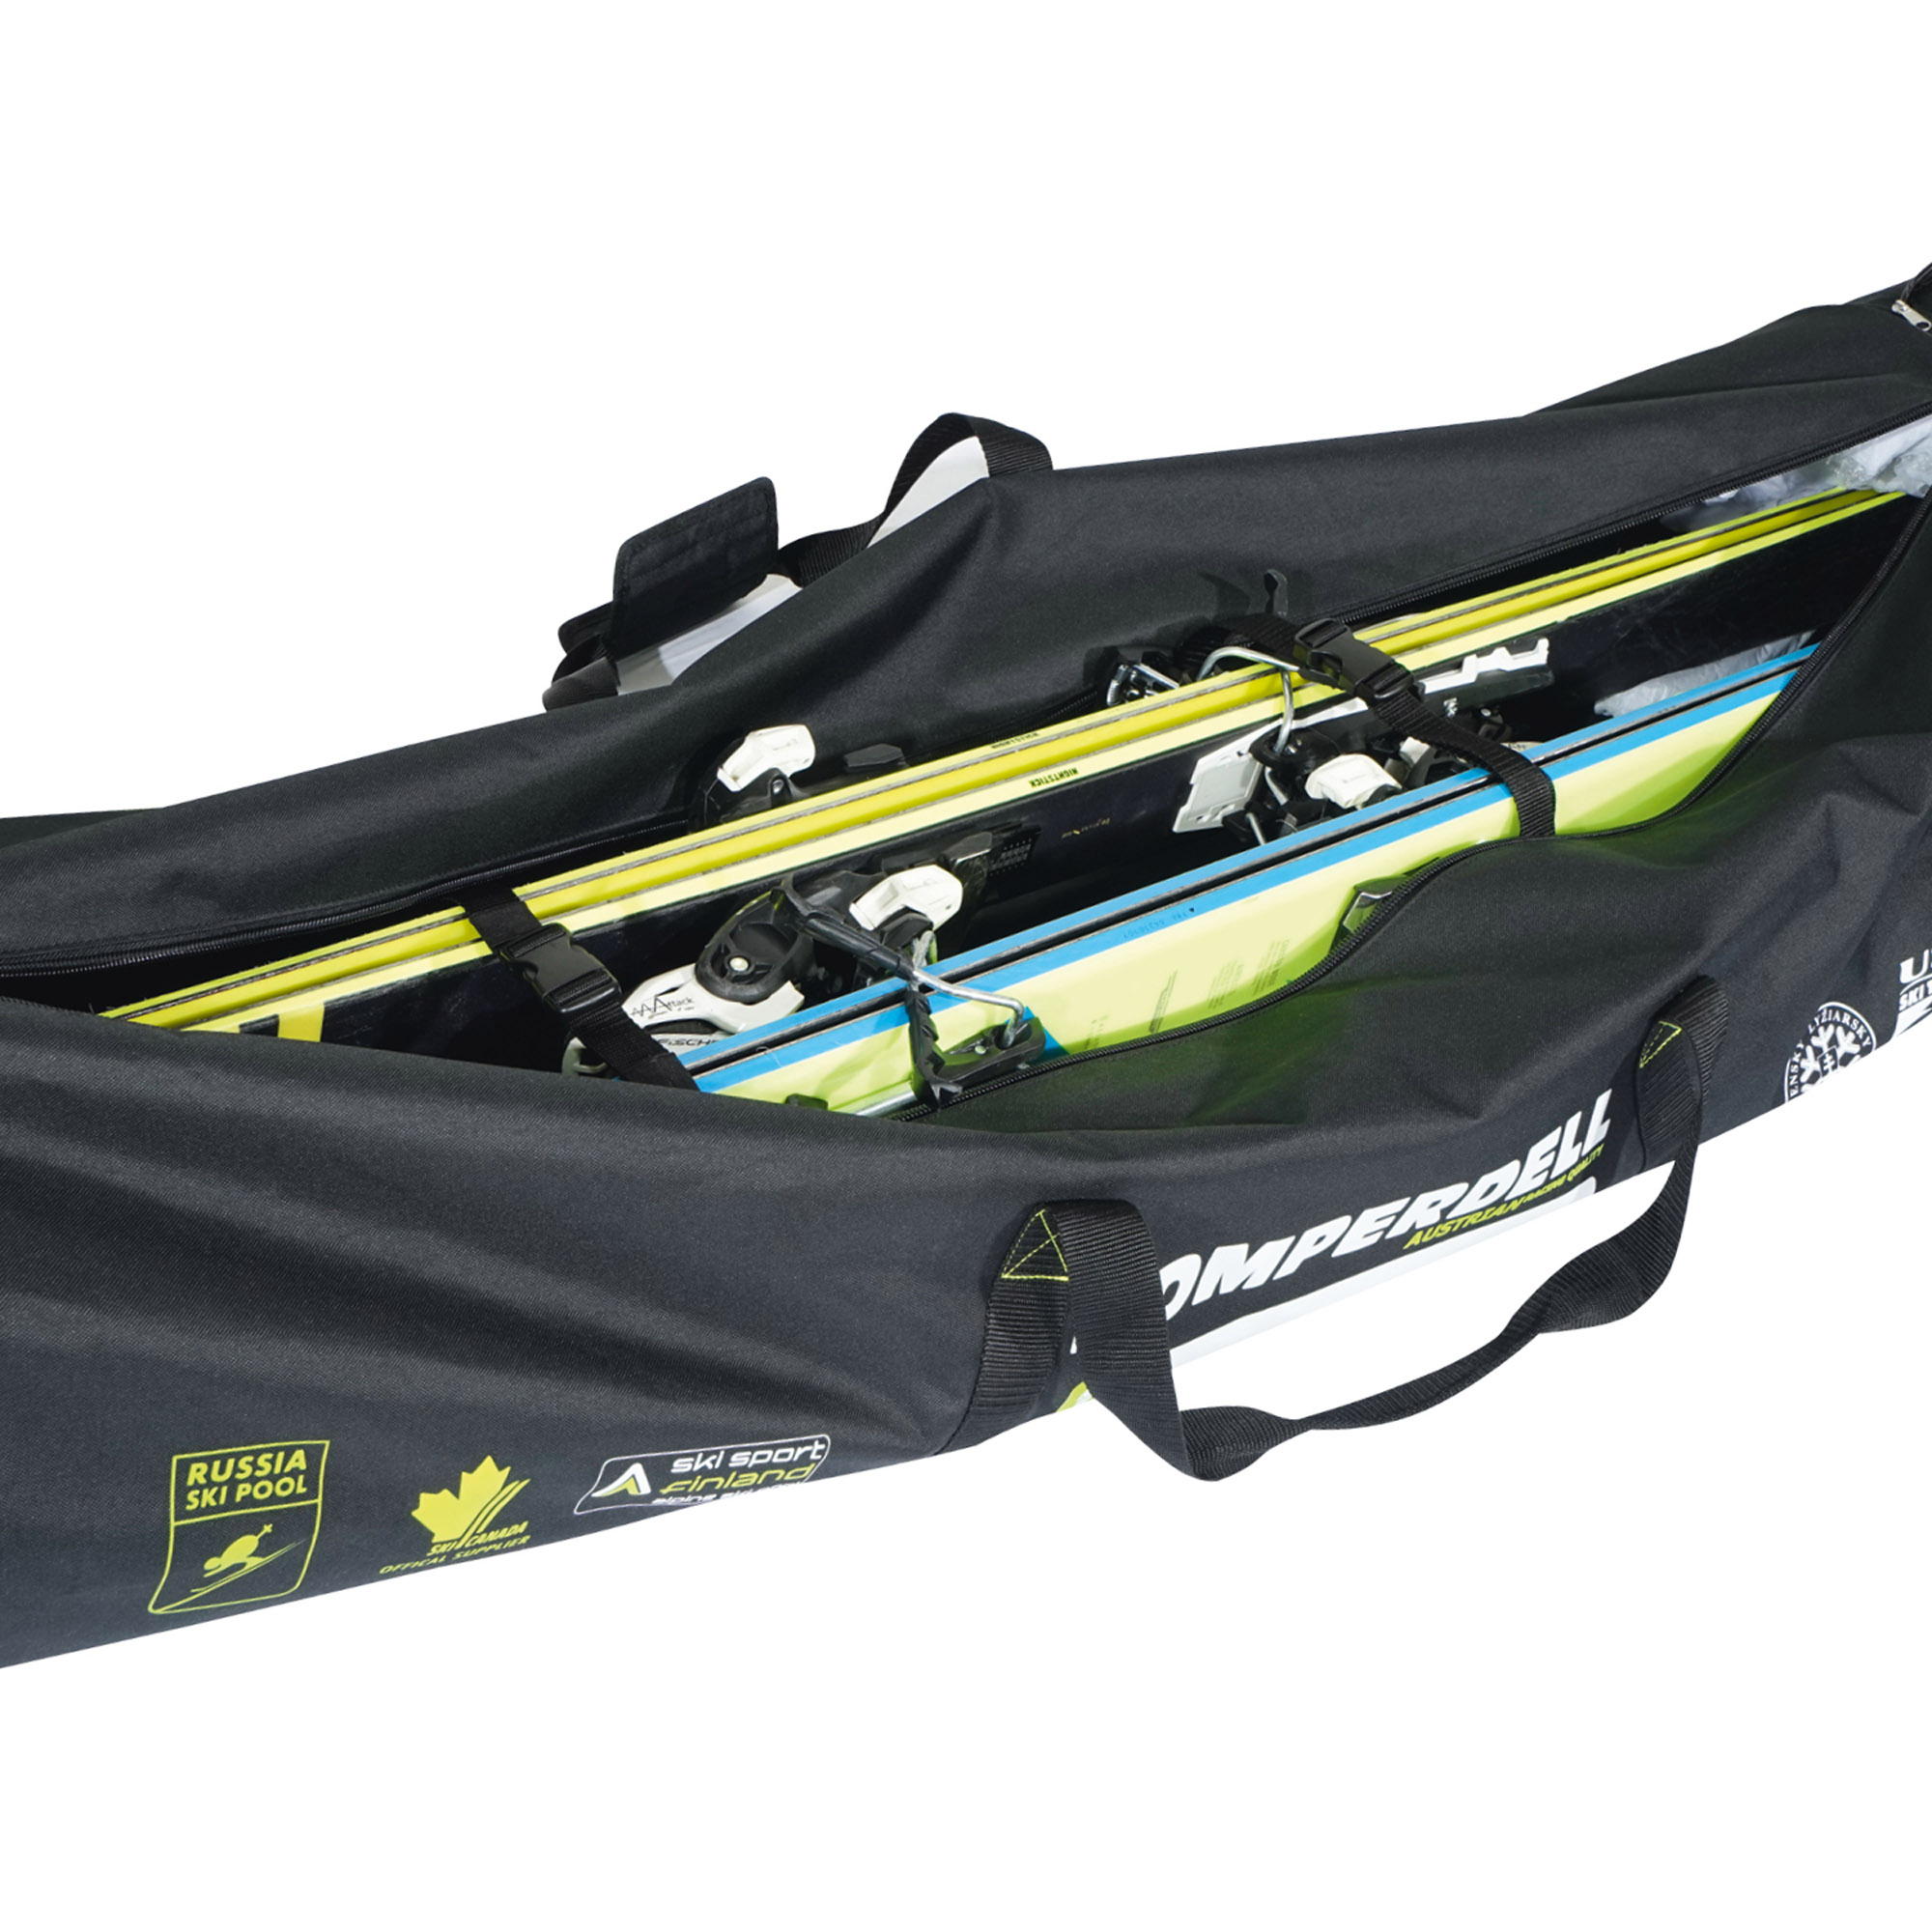 Nationalteam Expandable Pole and Ski Bag with Wheels